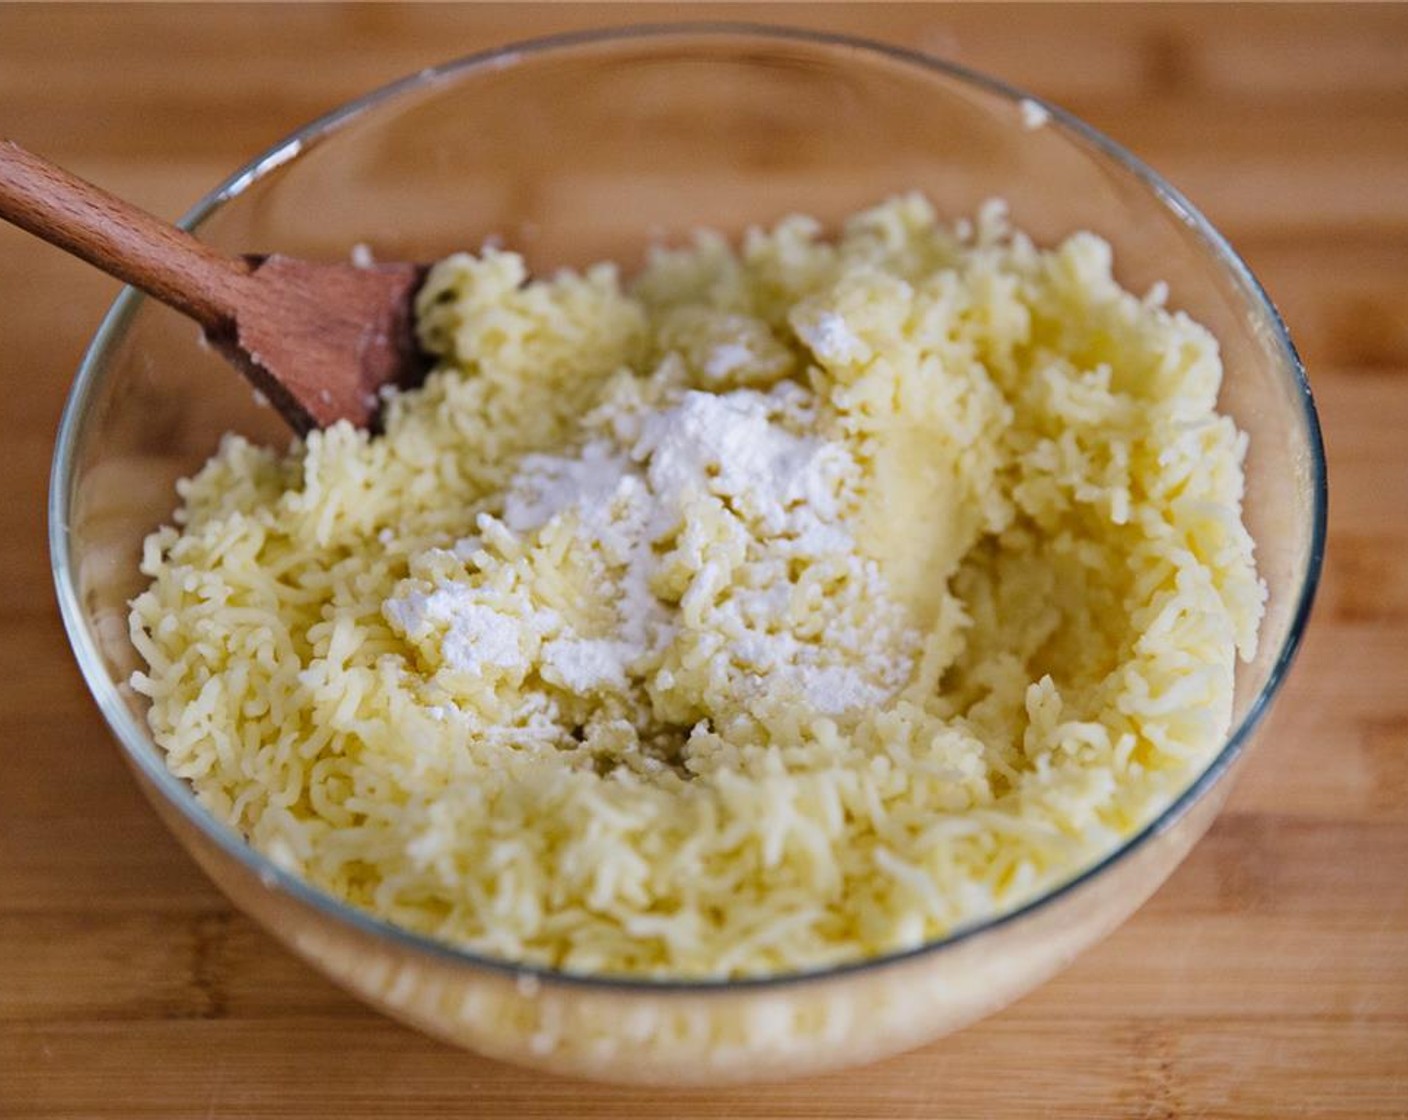 step 6 Sprinkle the Baking Powder (1 tsp) over the mashed potatoes.